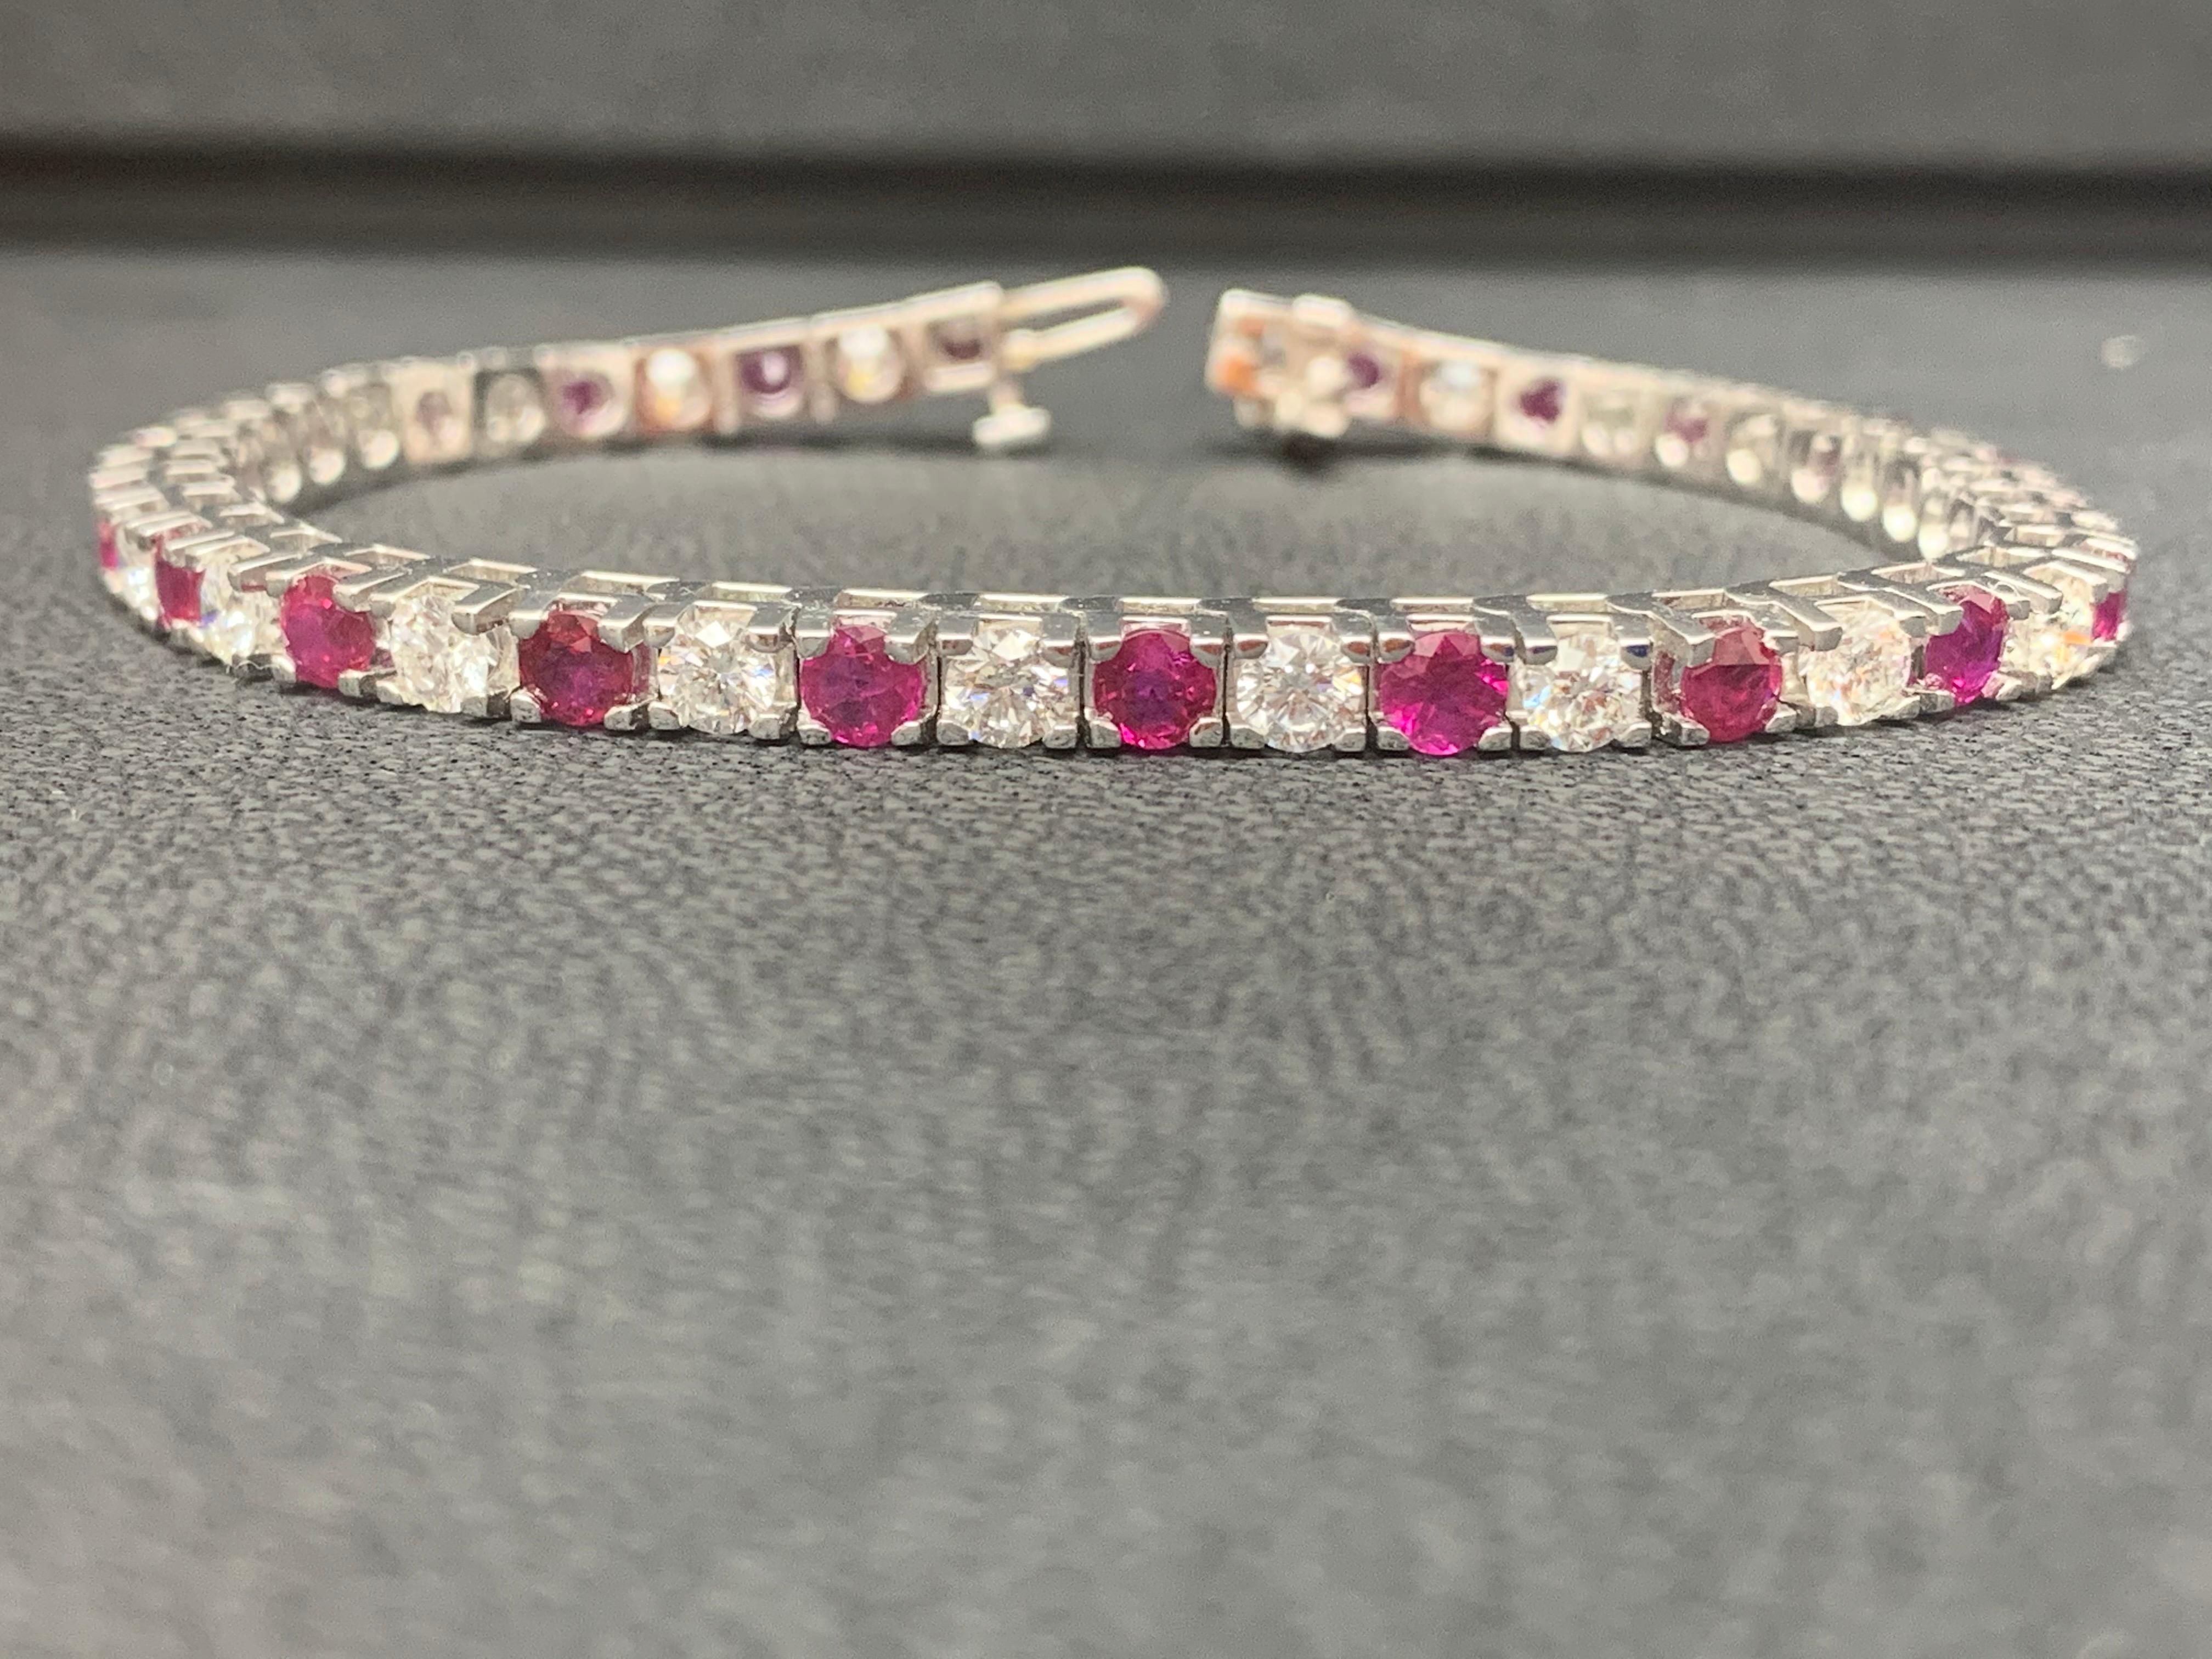 5.37 Carat Ruby and 3.52 Carat Diamond Tennis Bracelet in 18K White Gold For Sale 2